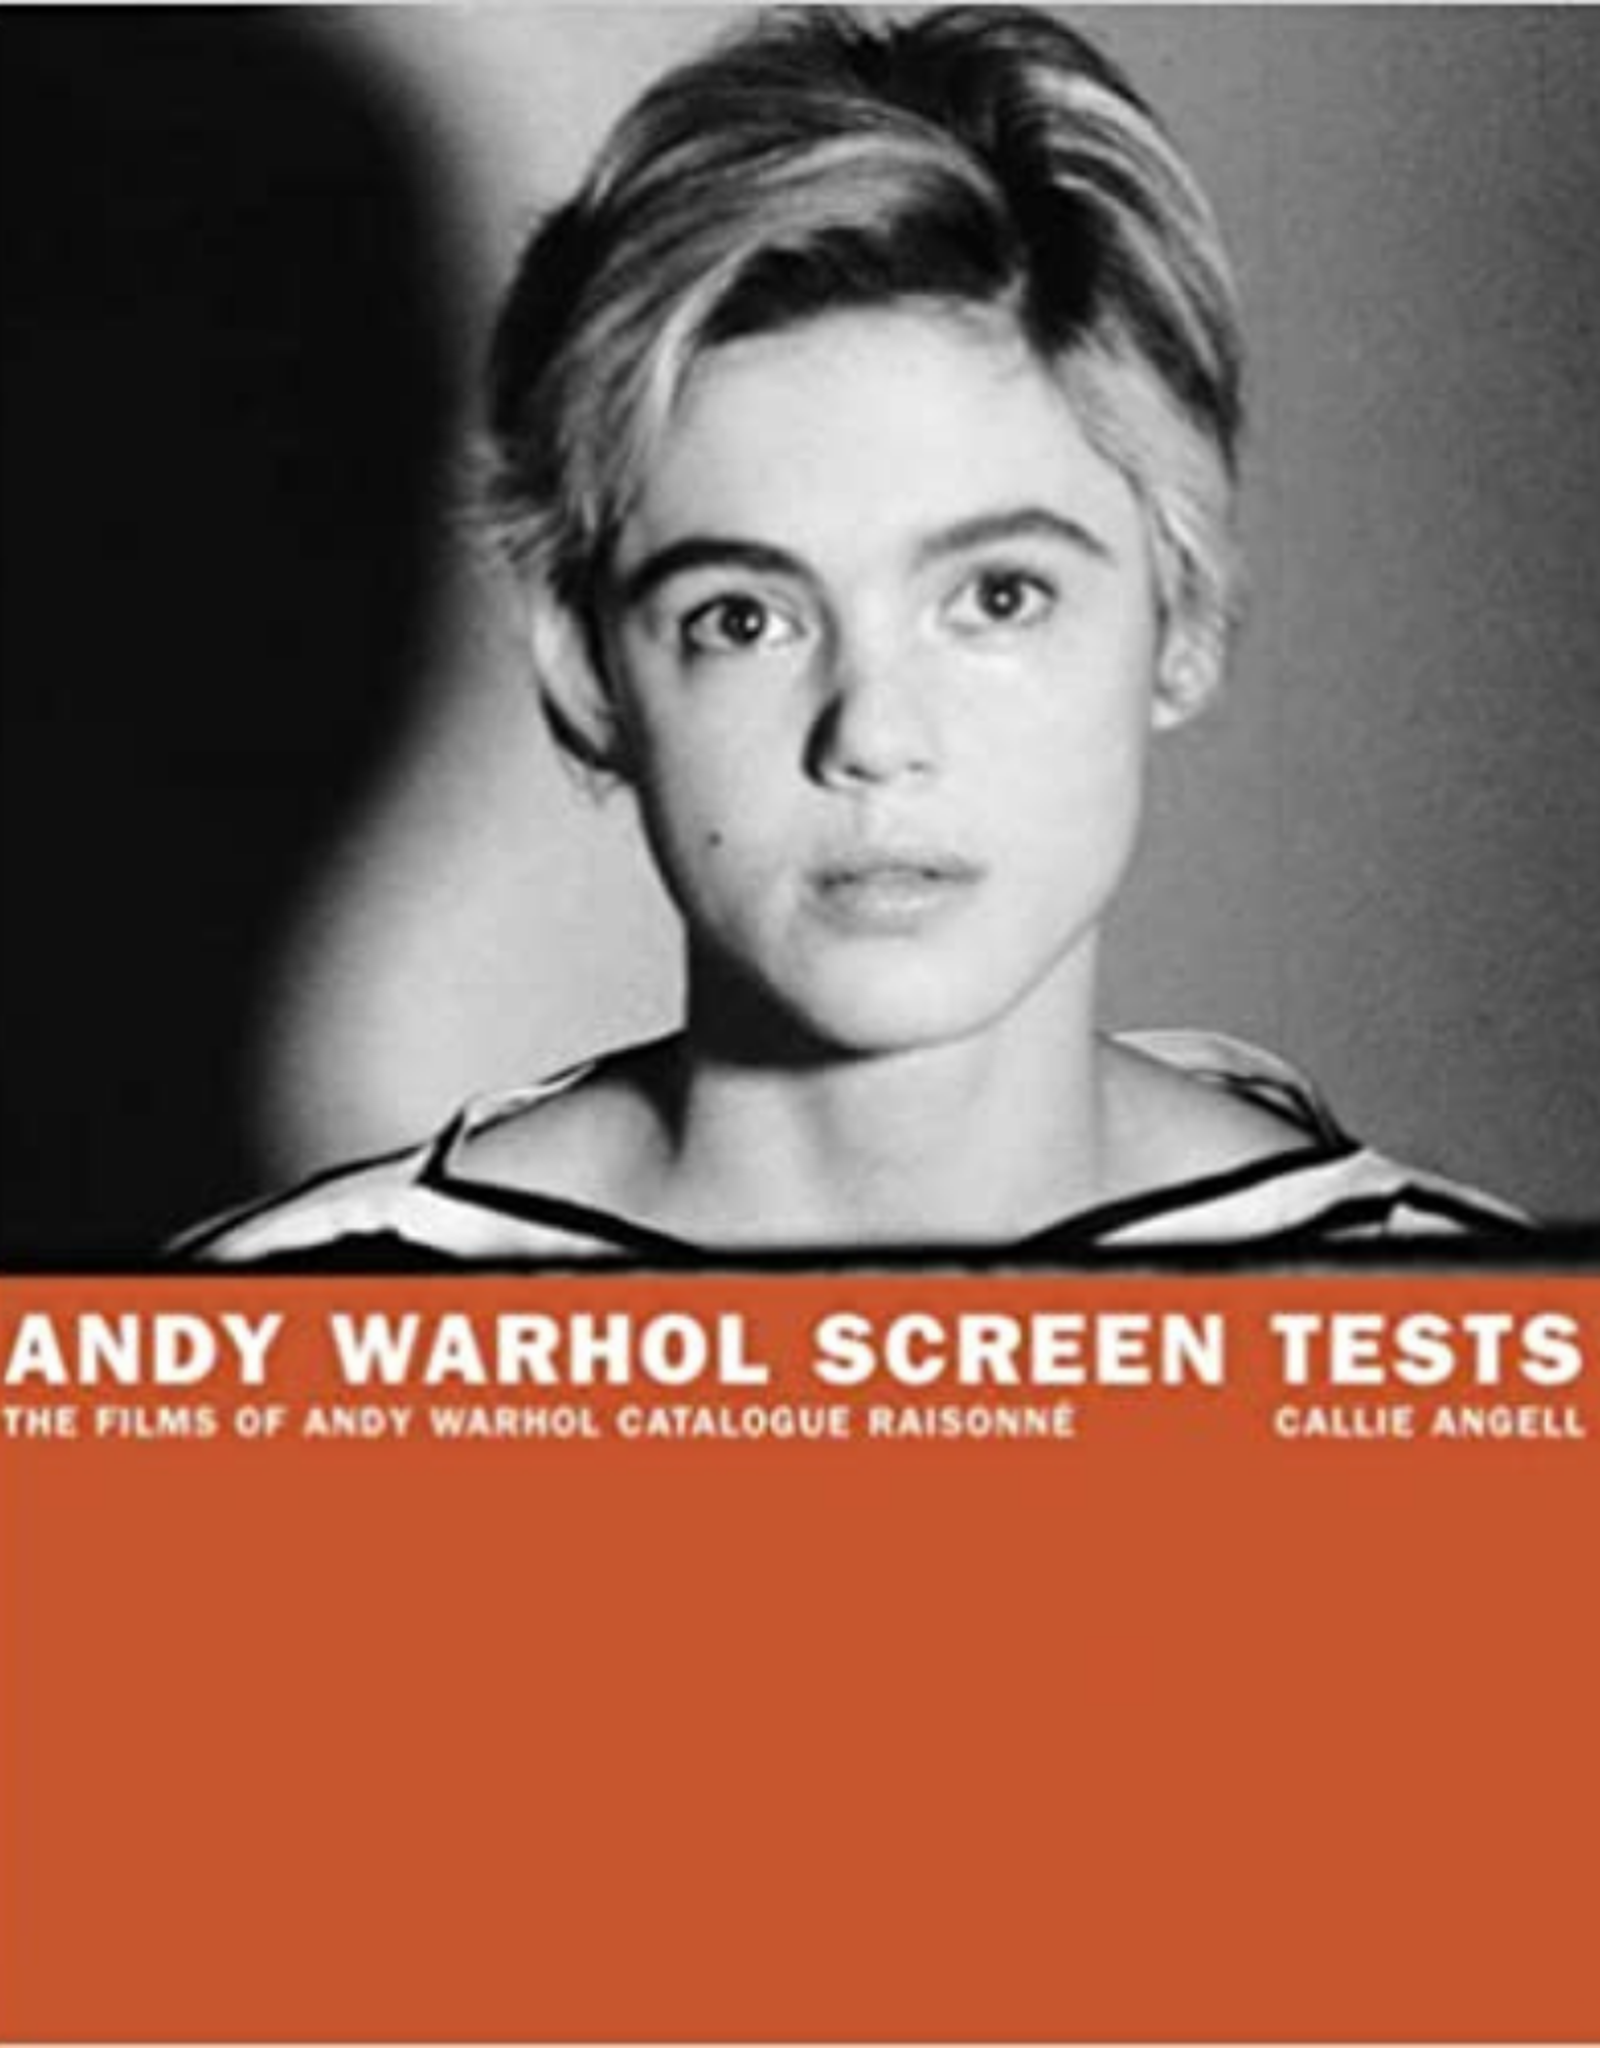 Andy Warhol Screen Tests, The Films of Andy Warhol